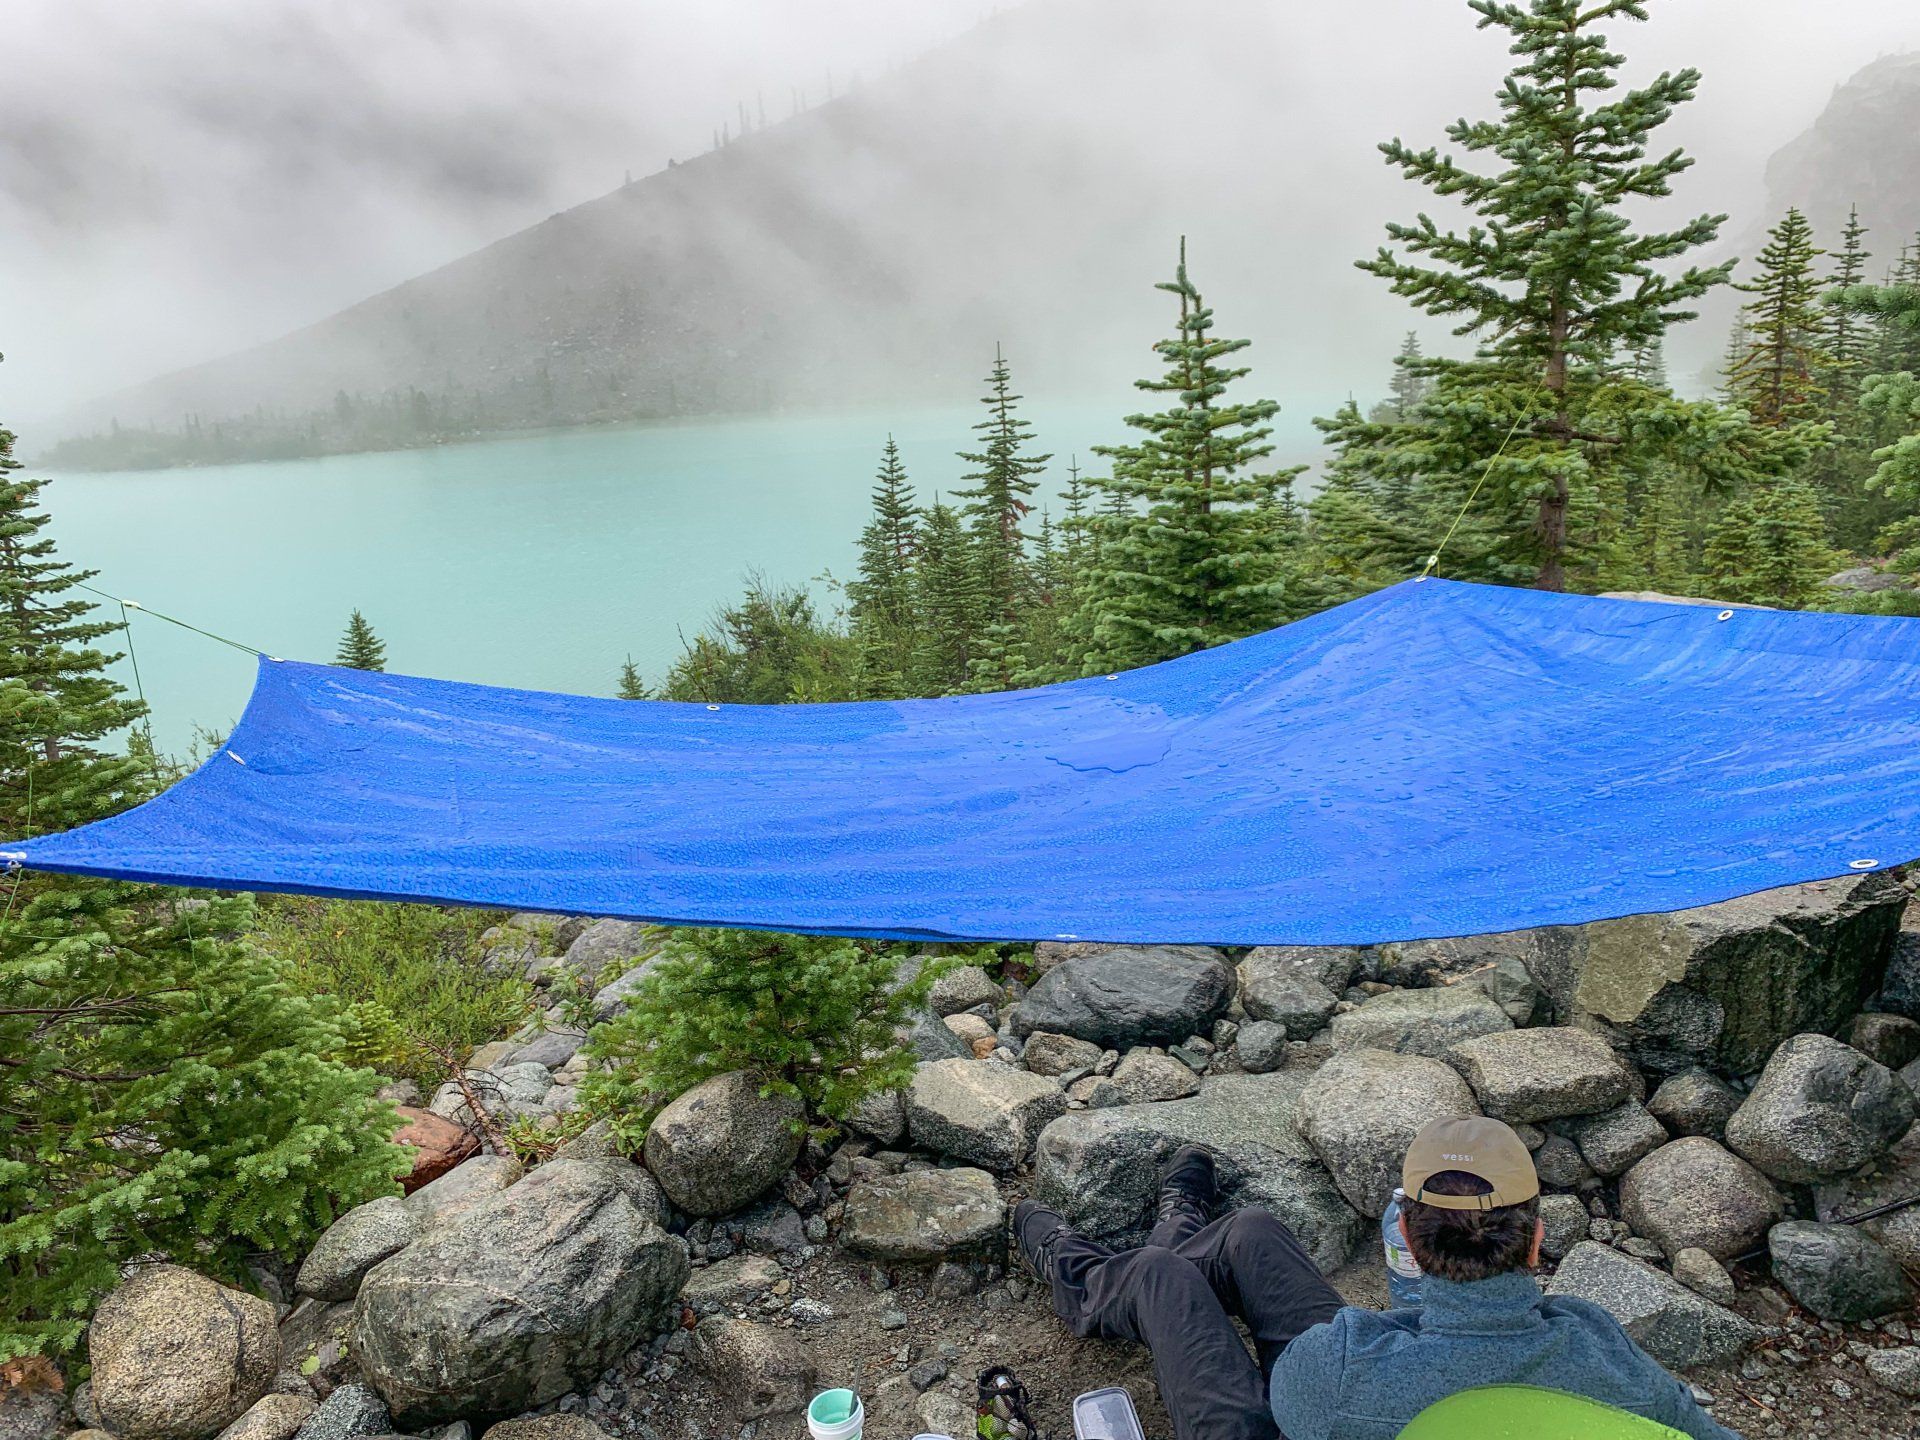 Blue poly tarp hanging over a camp with a view of upper Joffre lake, Joffre Lakes Provincial Park, BC, Canada